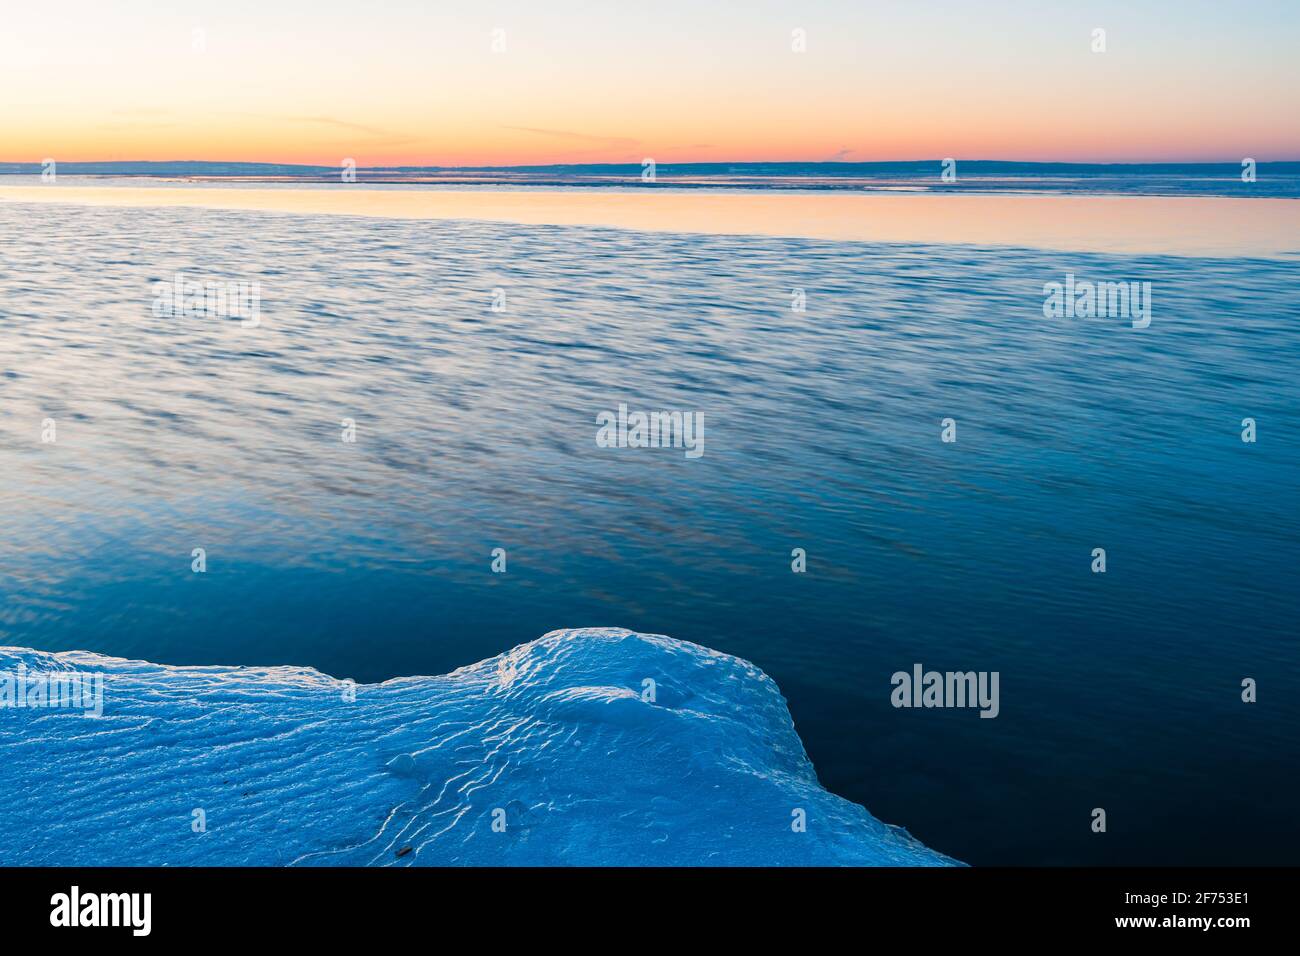 Icy shoreline in front of lake Stock Photo